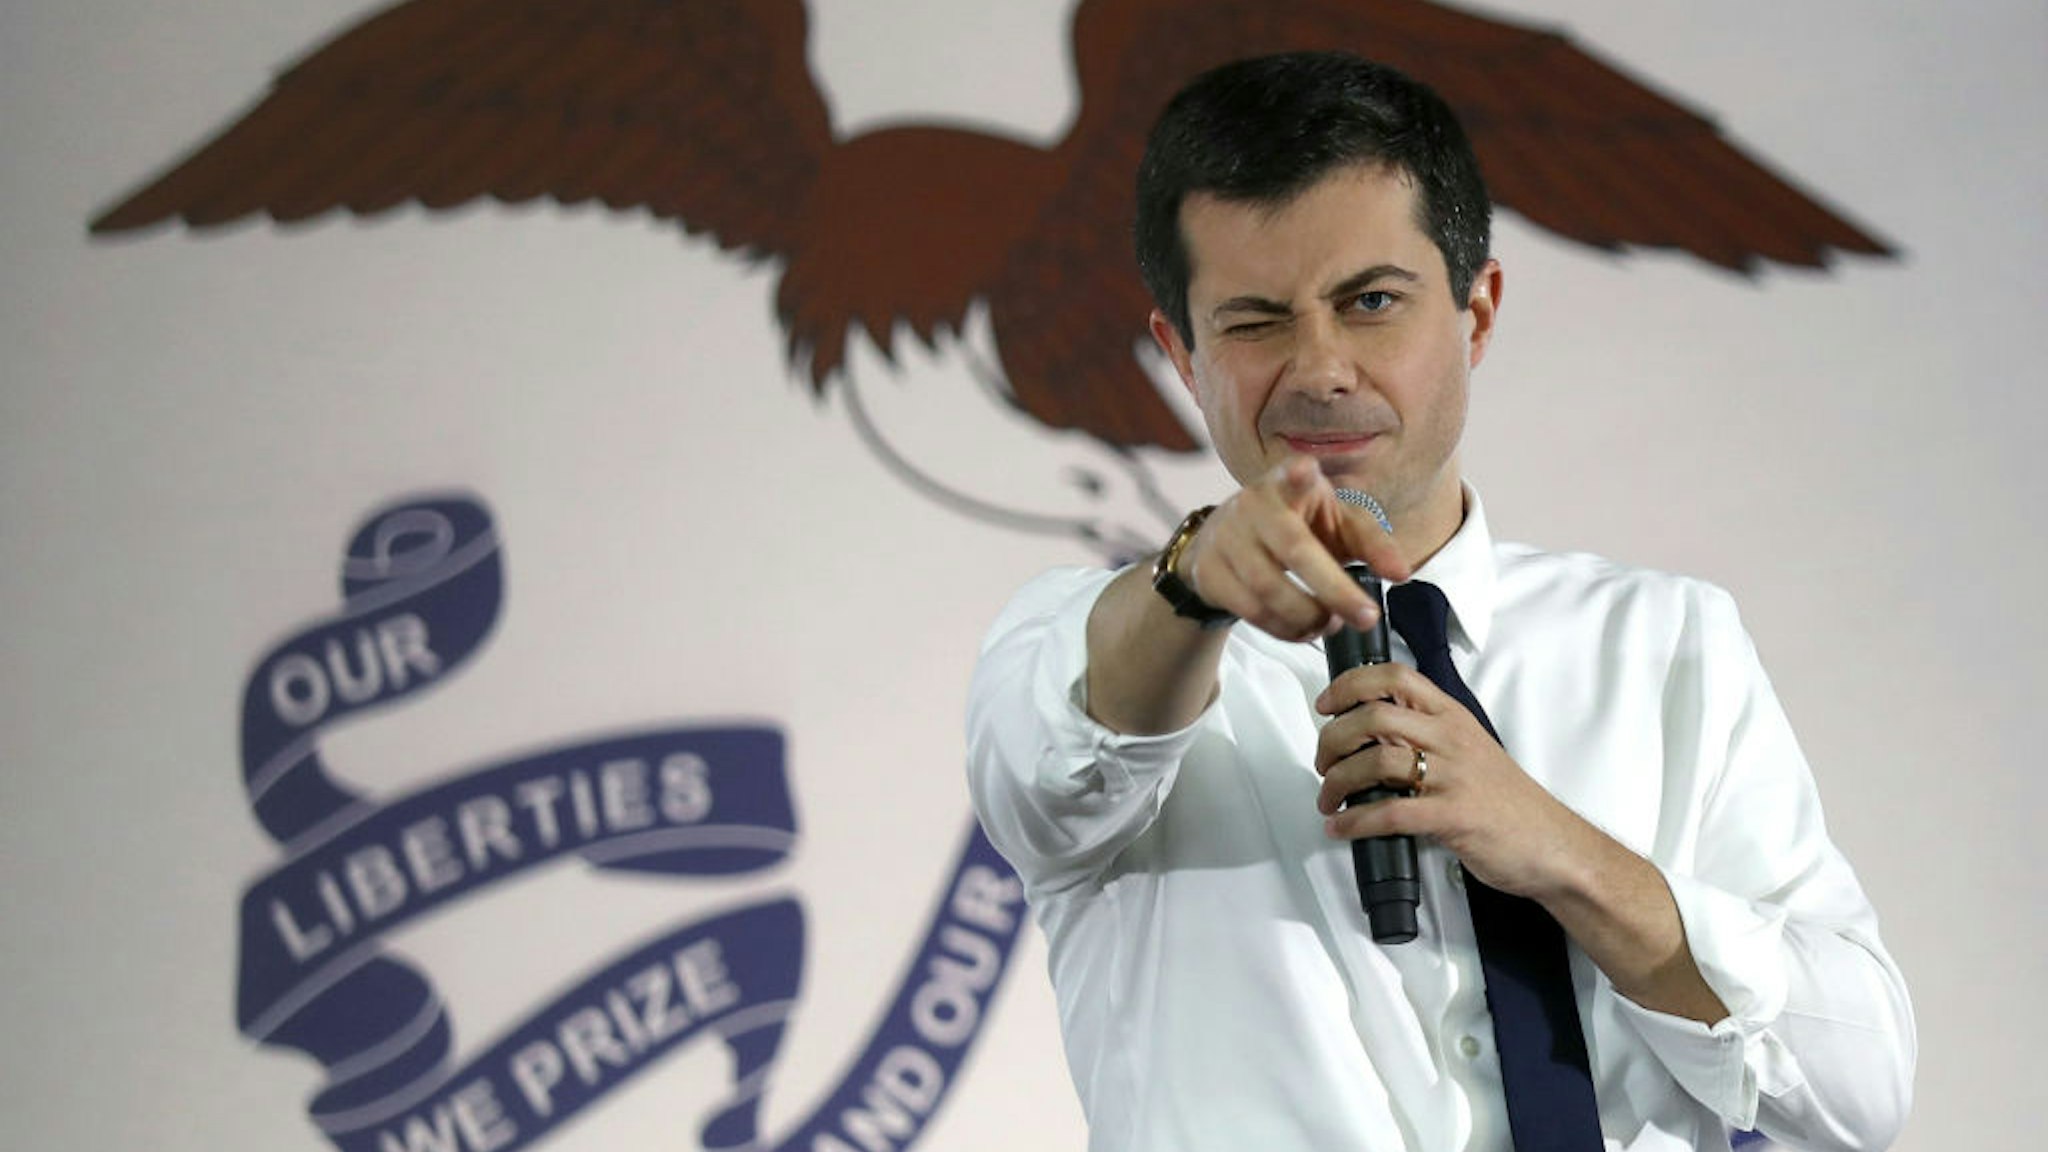 Democratic presidential candidate South Bend, Indiana Mayor Pete Buttigieg speaks during a campaign event in the The Skate Pit on December 29, 2019 in Knoxville, Iowa.